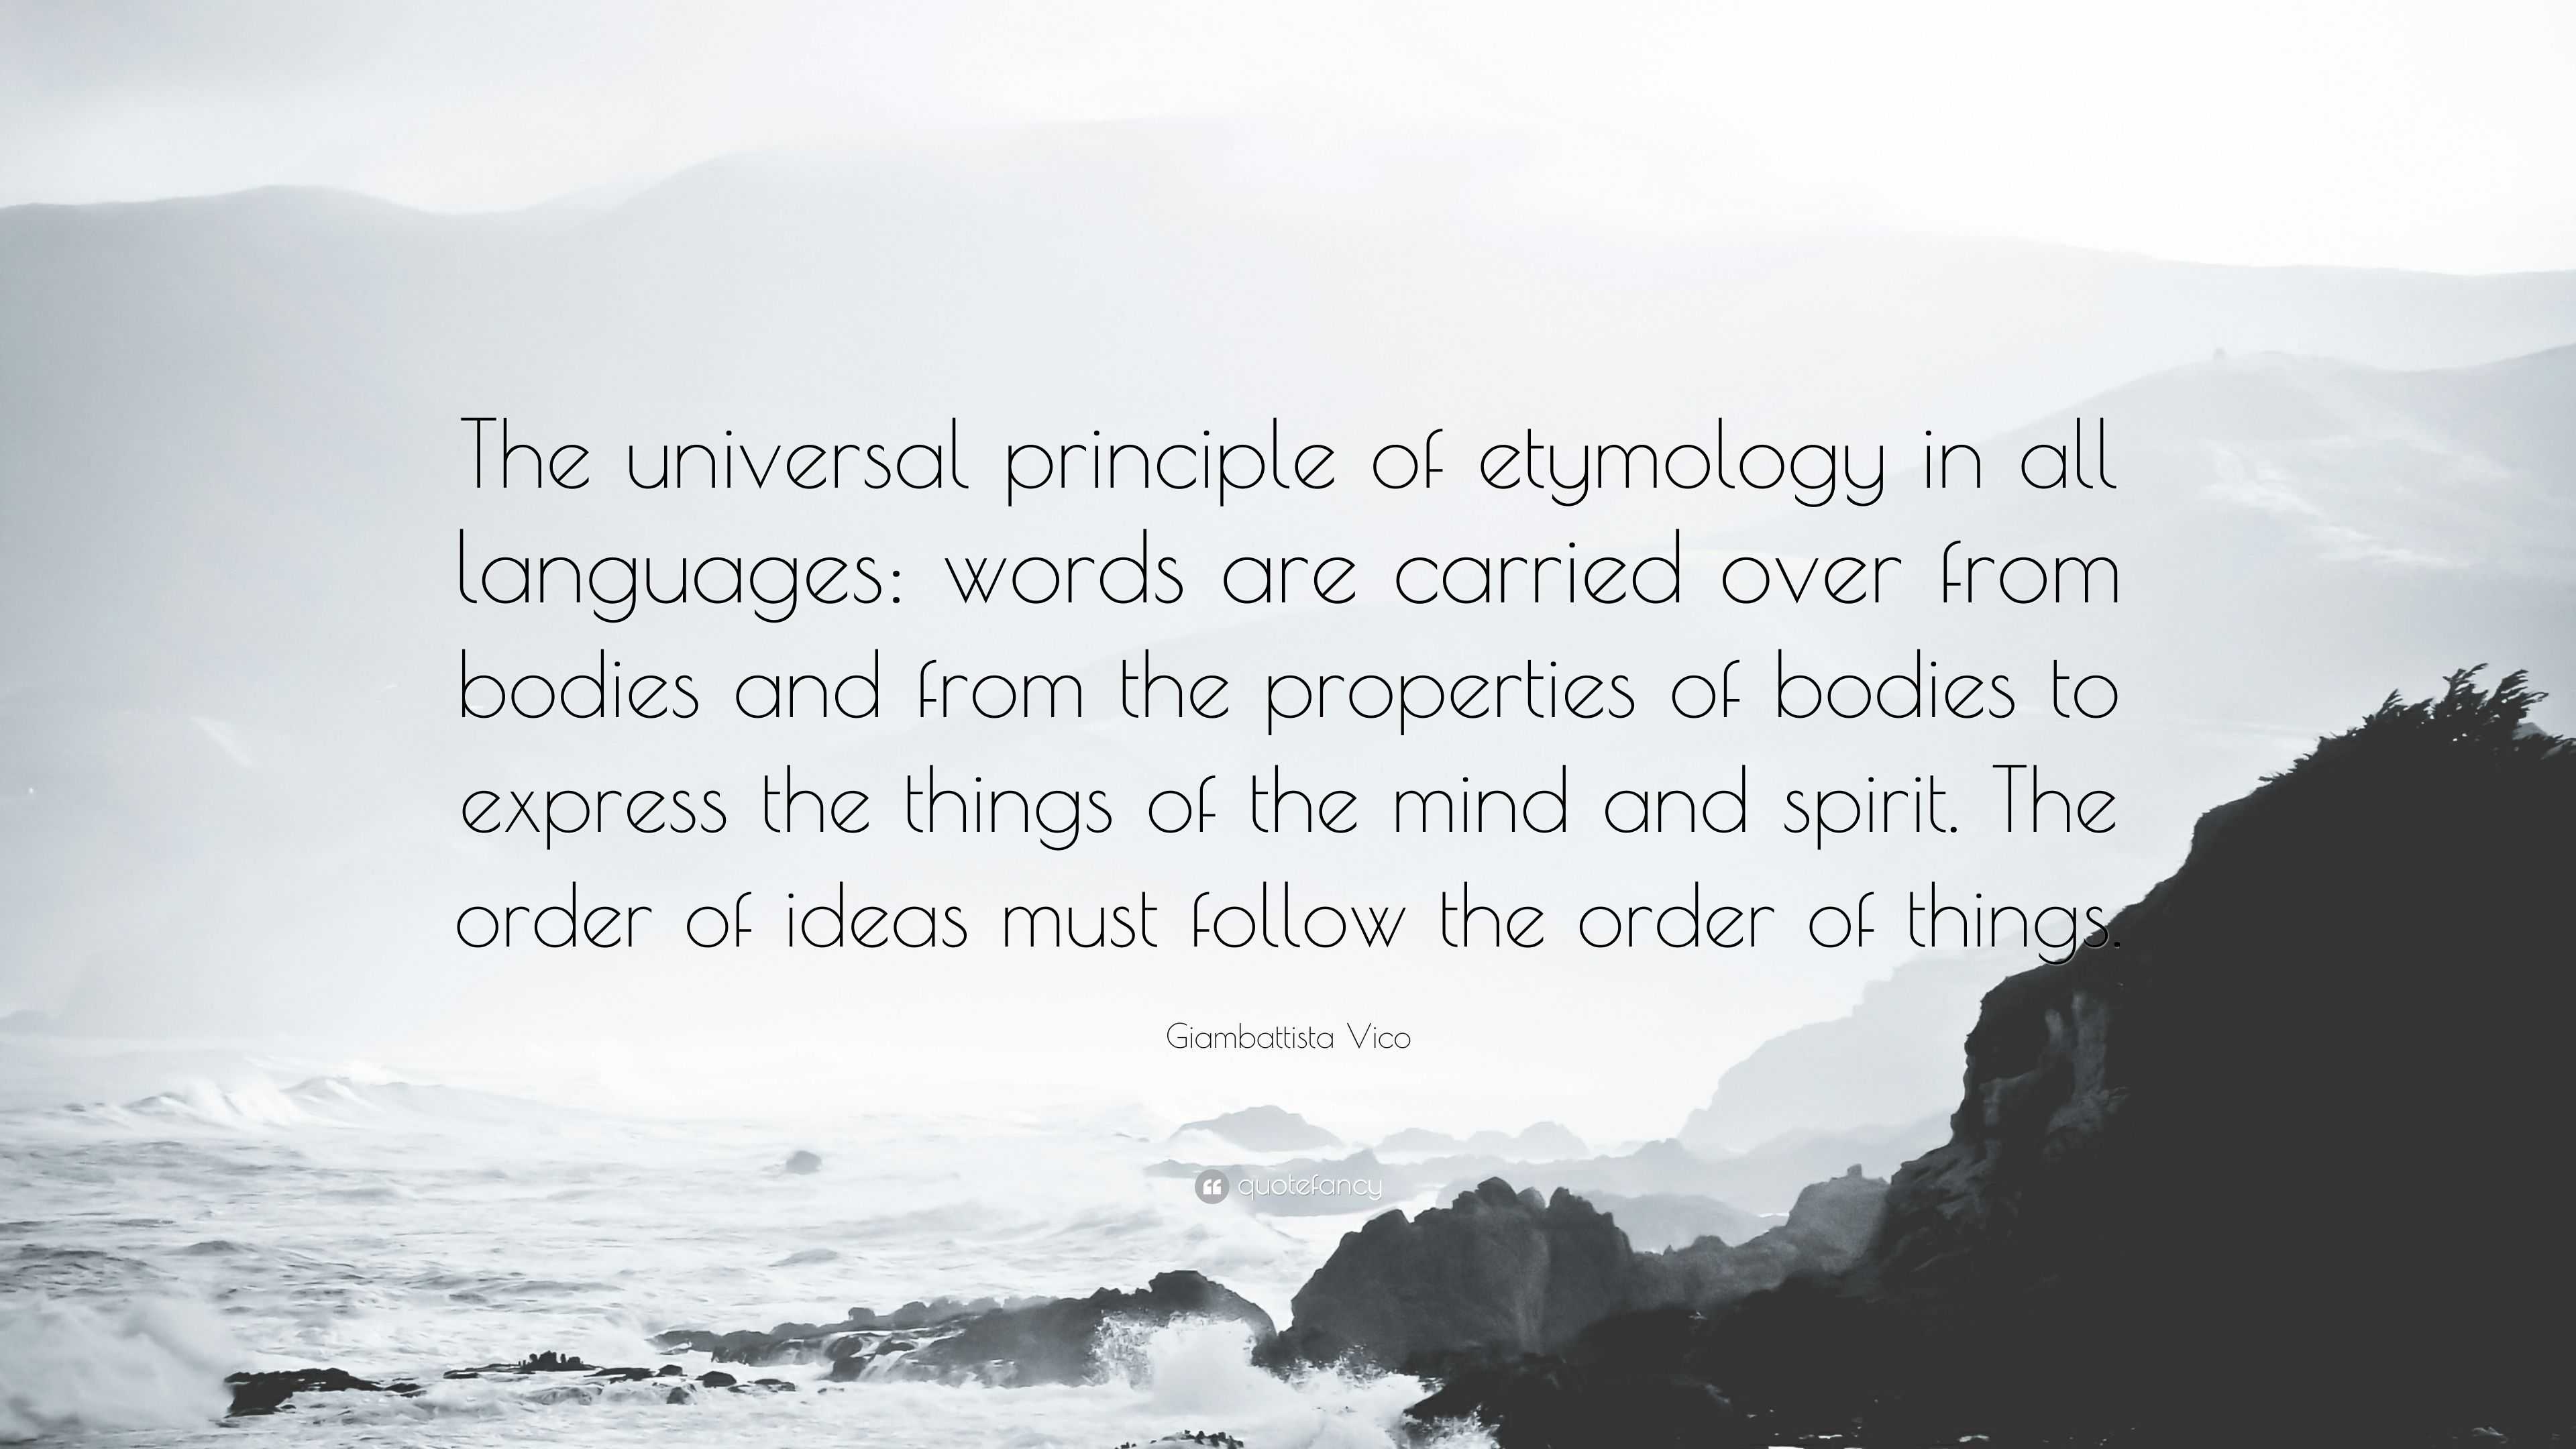 Giambattista Vico Quote: “The universal principle of etymology in all  languages: words are carried over from bodies and from the properties of  bod...”